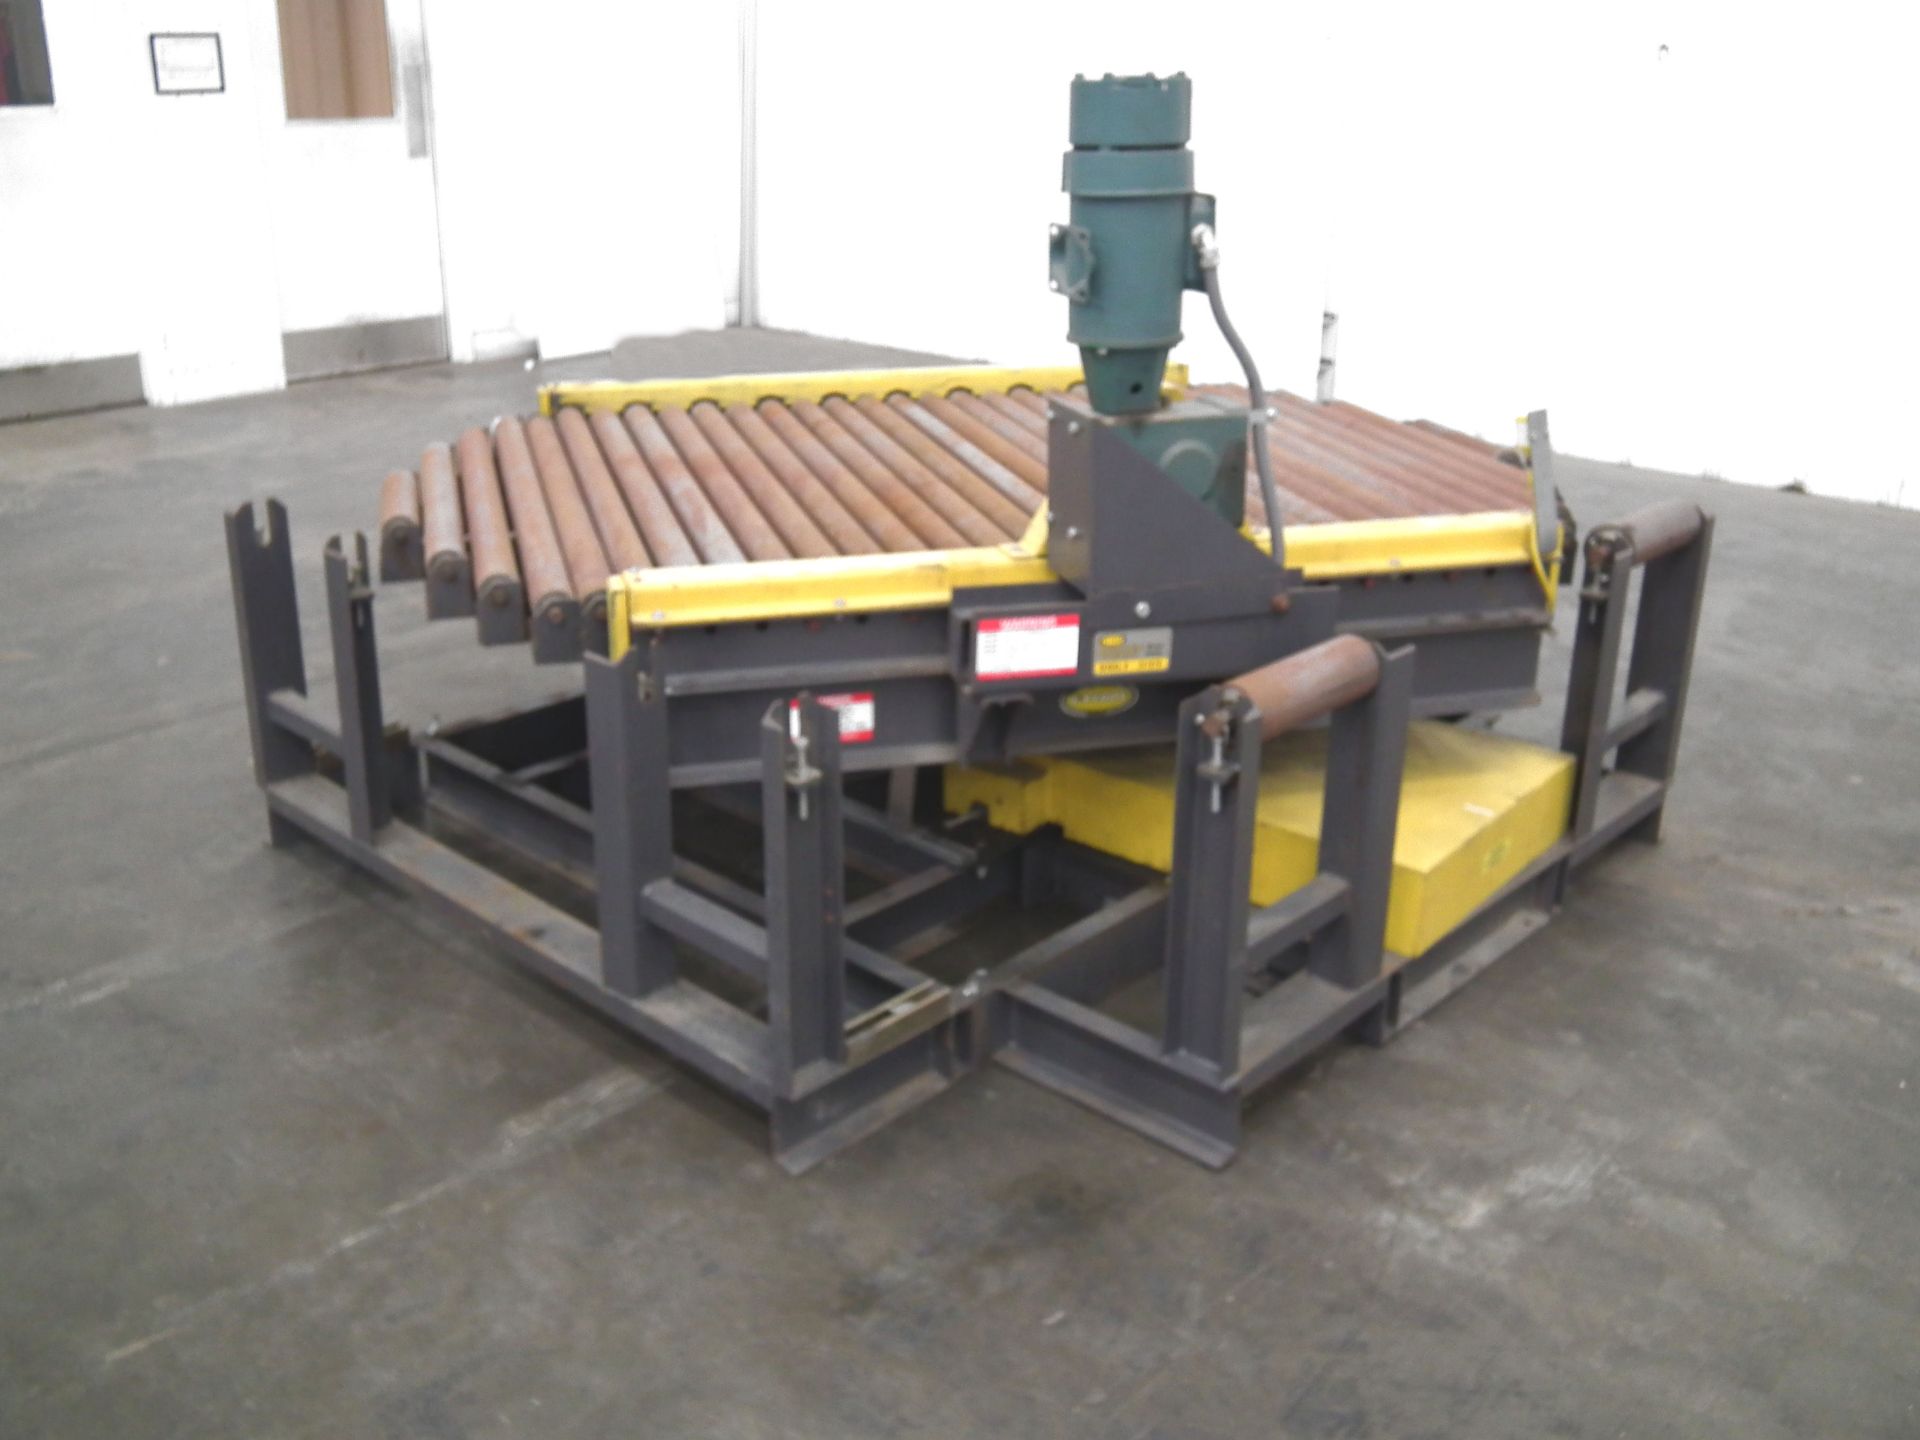 Hytrol Turntable for Full Pallets 90 Degree Motion A9776 - Image 3 of 8